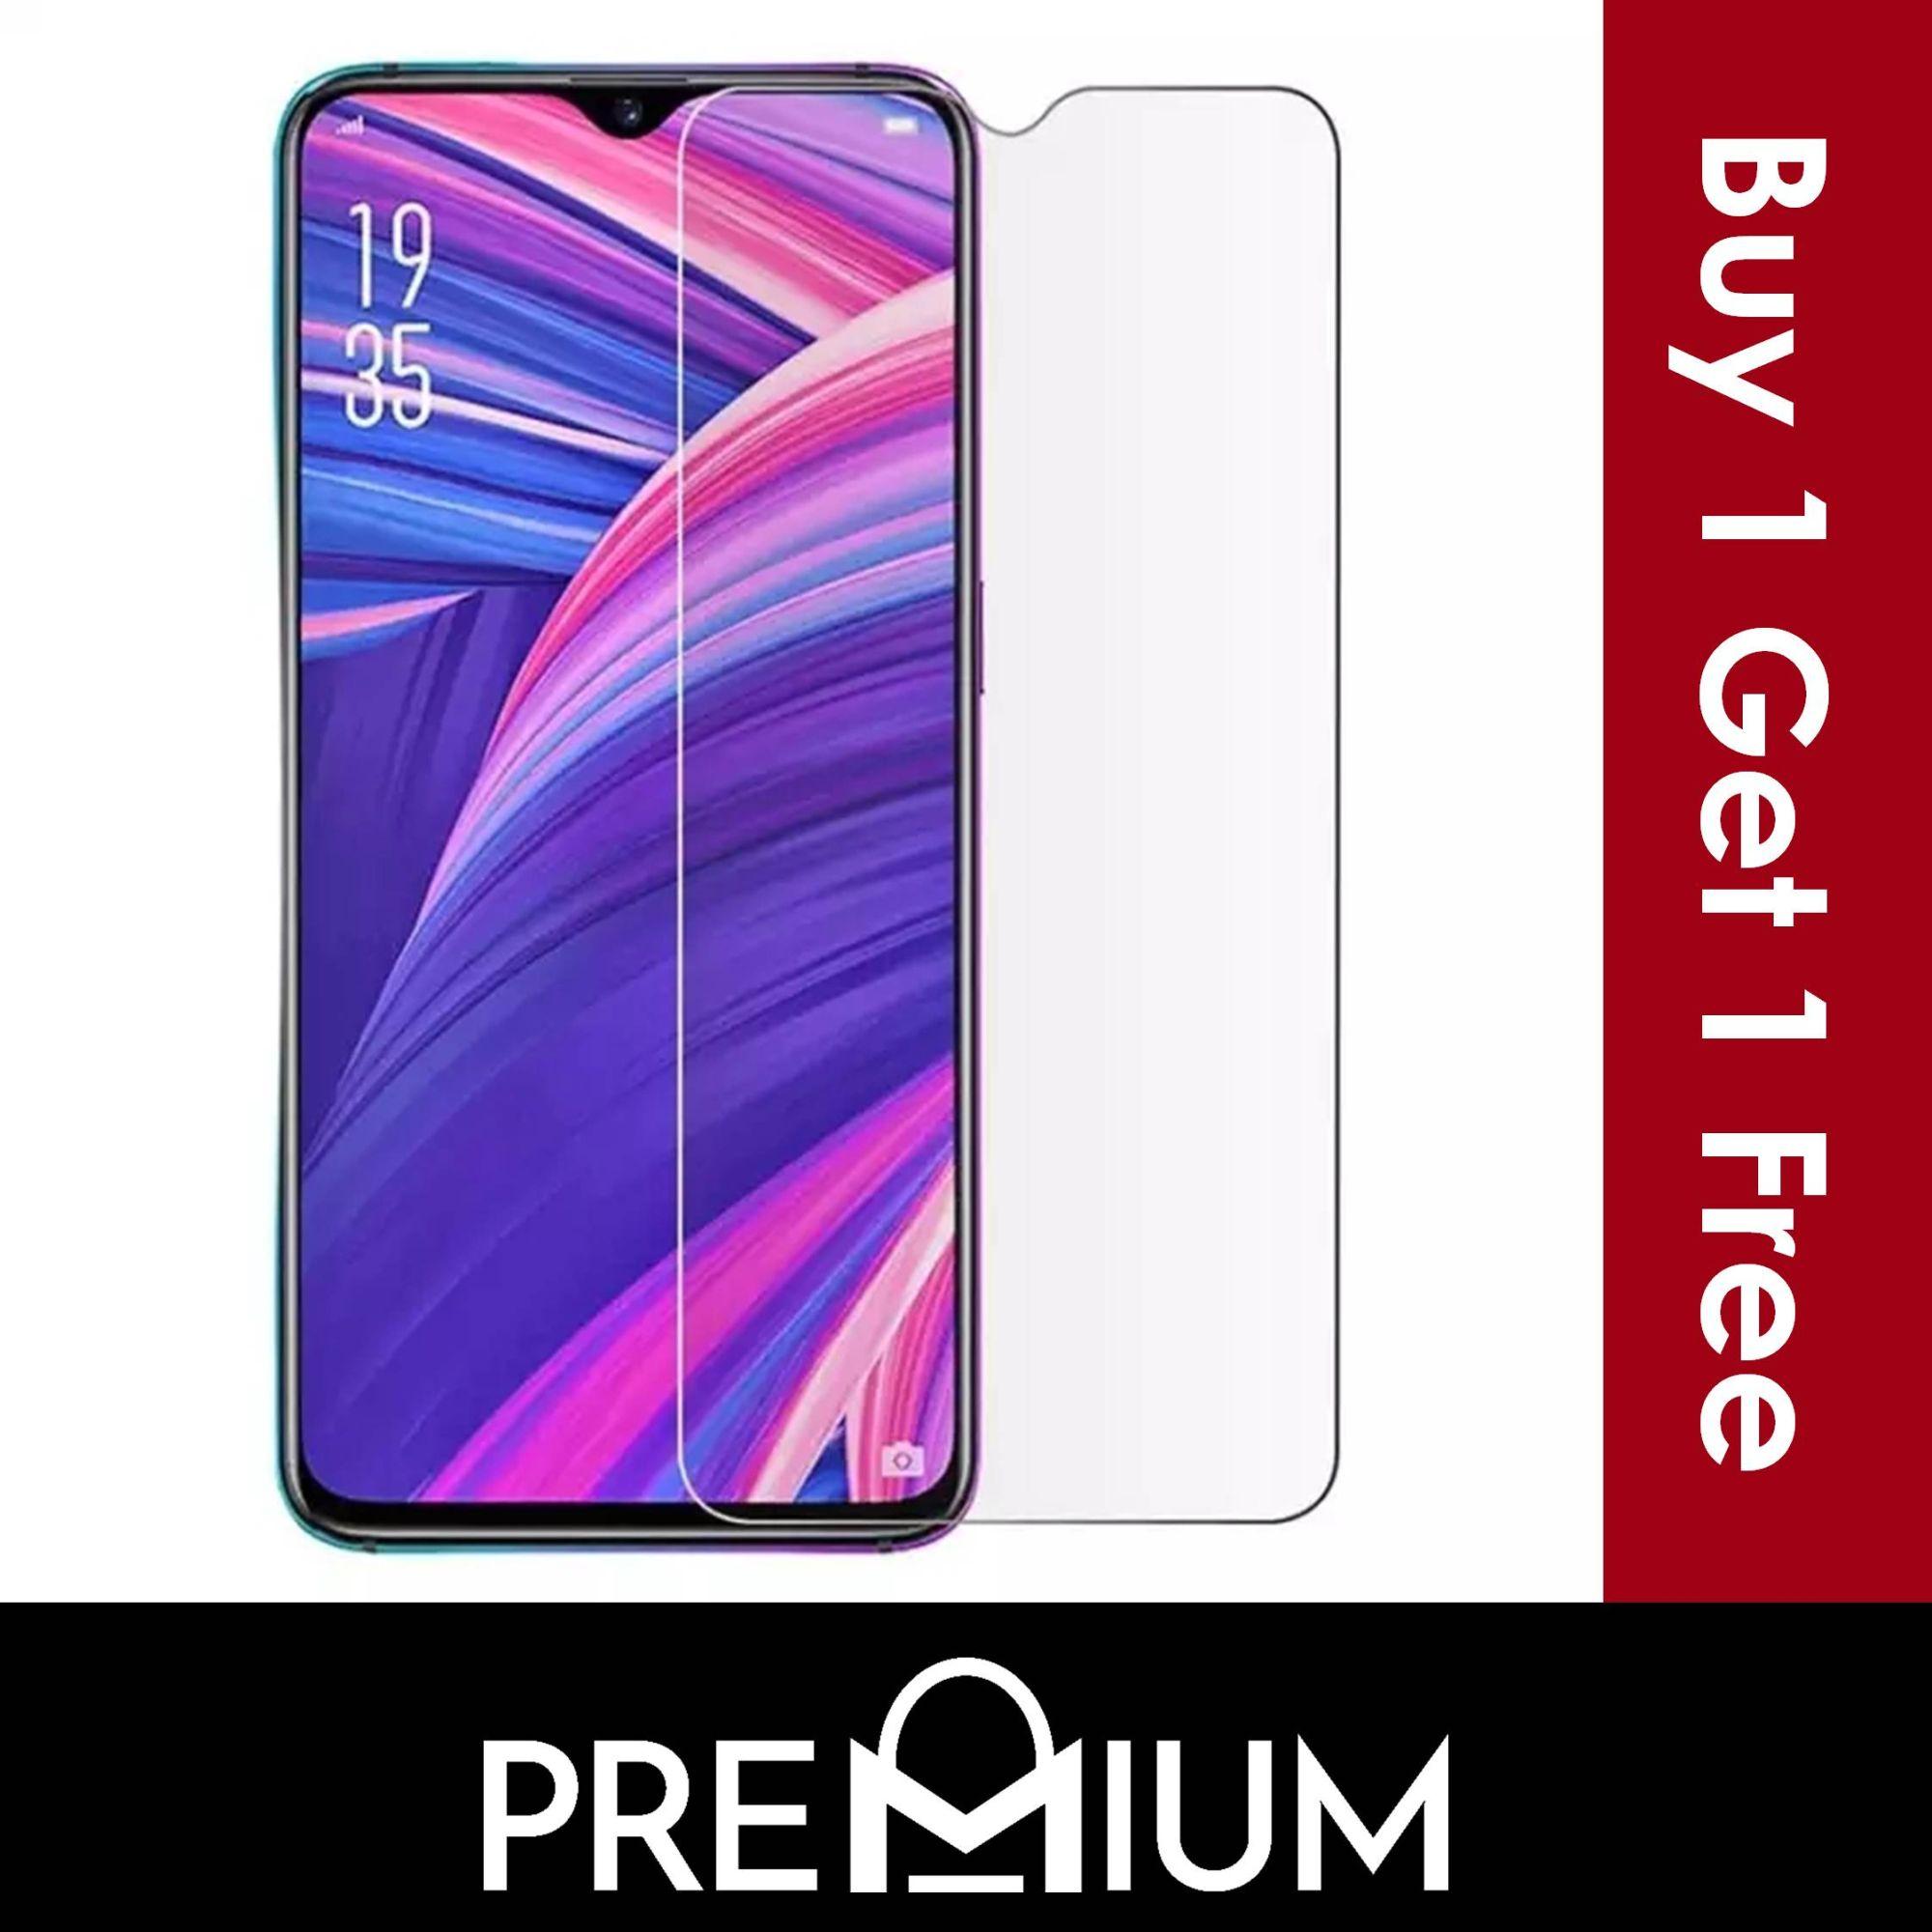 [BUY 1 FREE 1] Tempered Glass Screen Protector Clear For OPPO R17 PRO A3s AX5 R7S A37 A33 F1S A59...